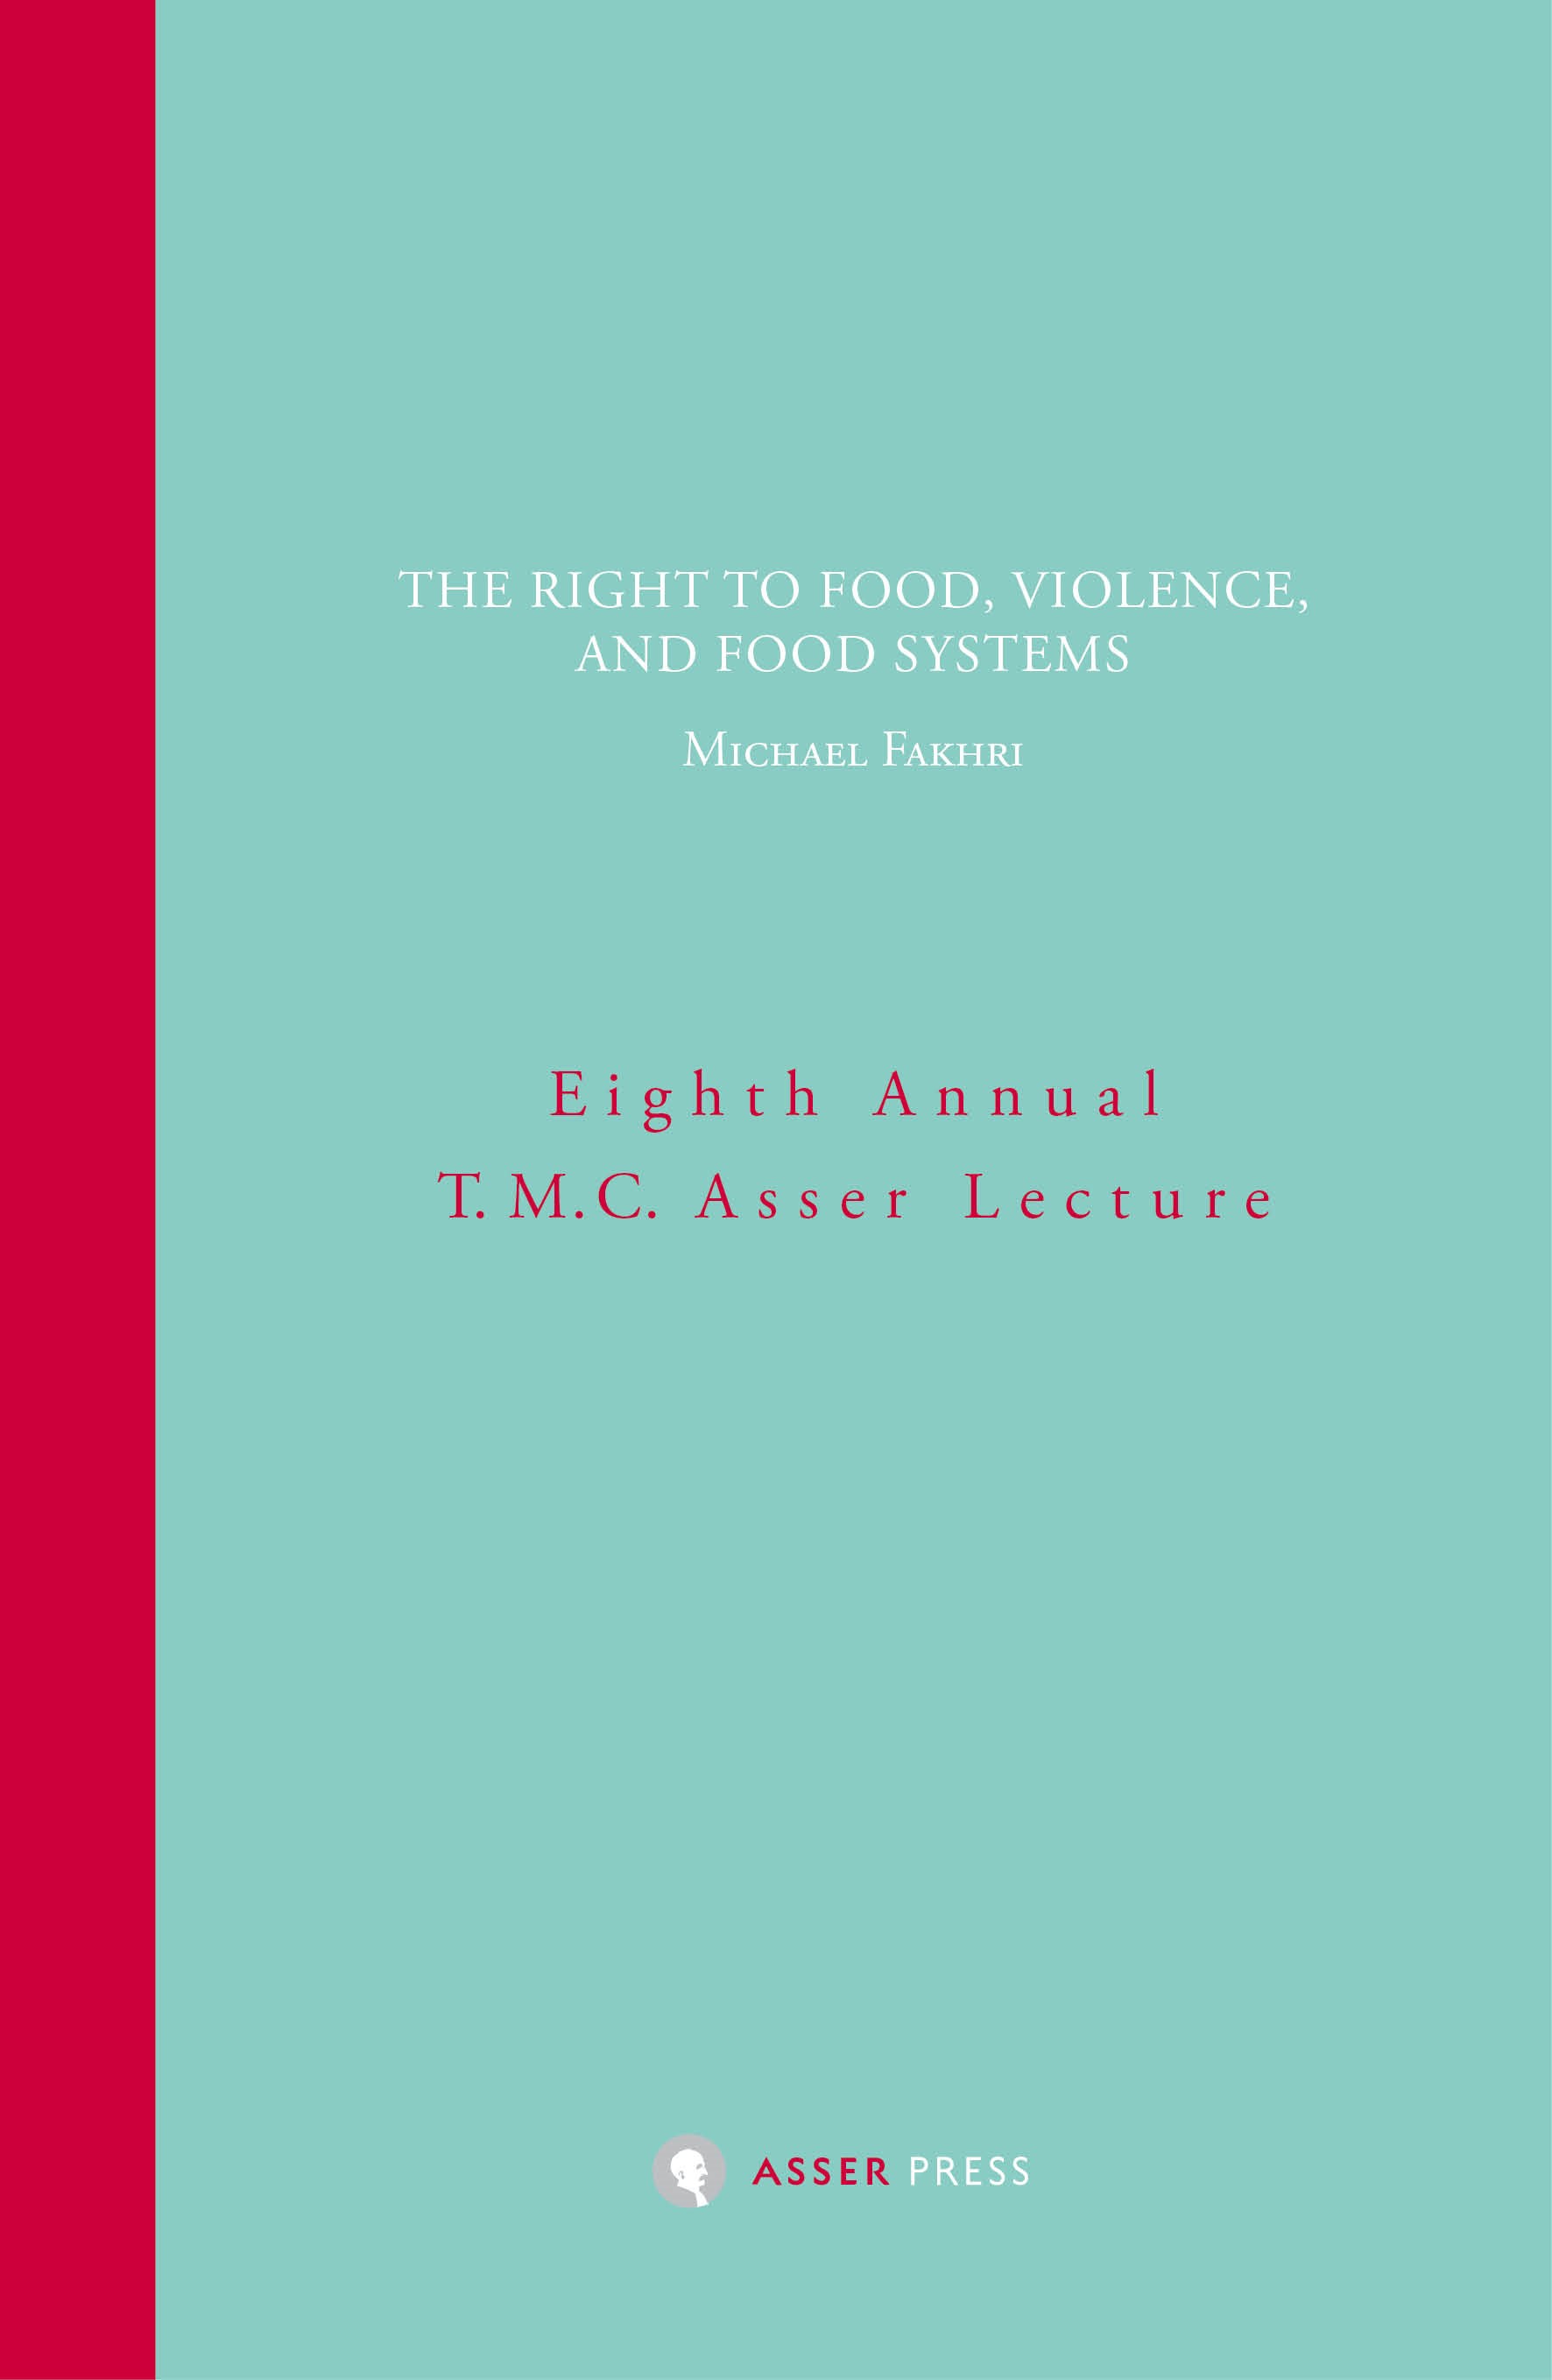 The Right to Food, Violence, and Food Systems – Eighth Annual T.M.C. Asser Lecture